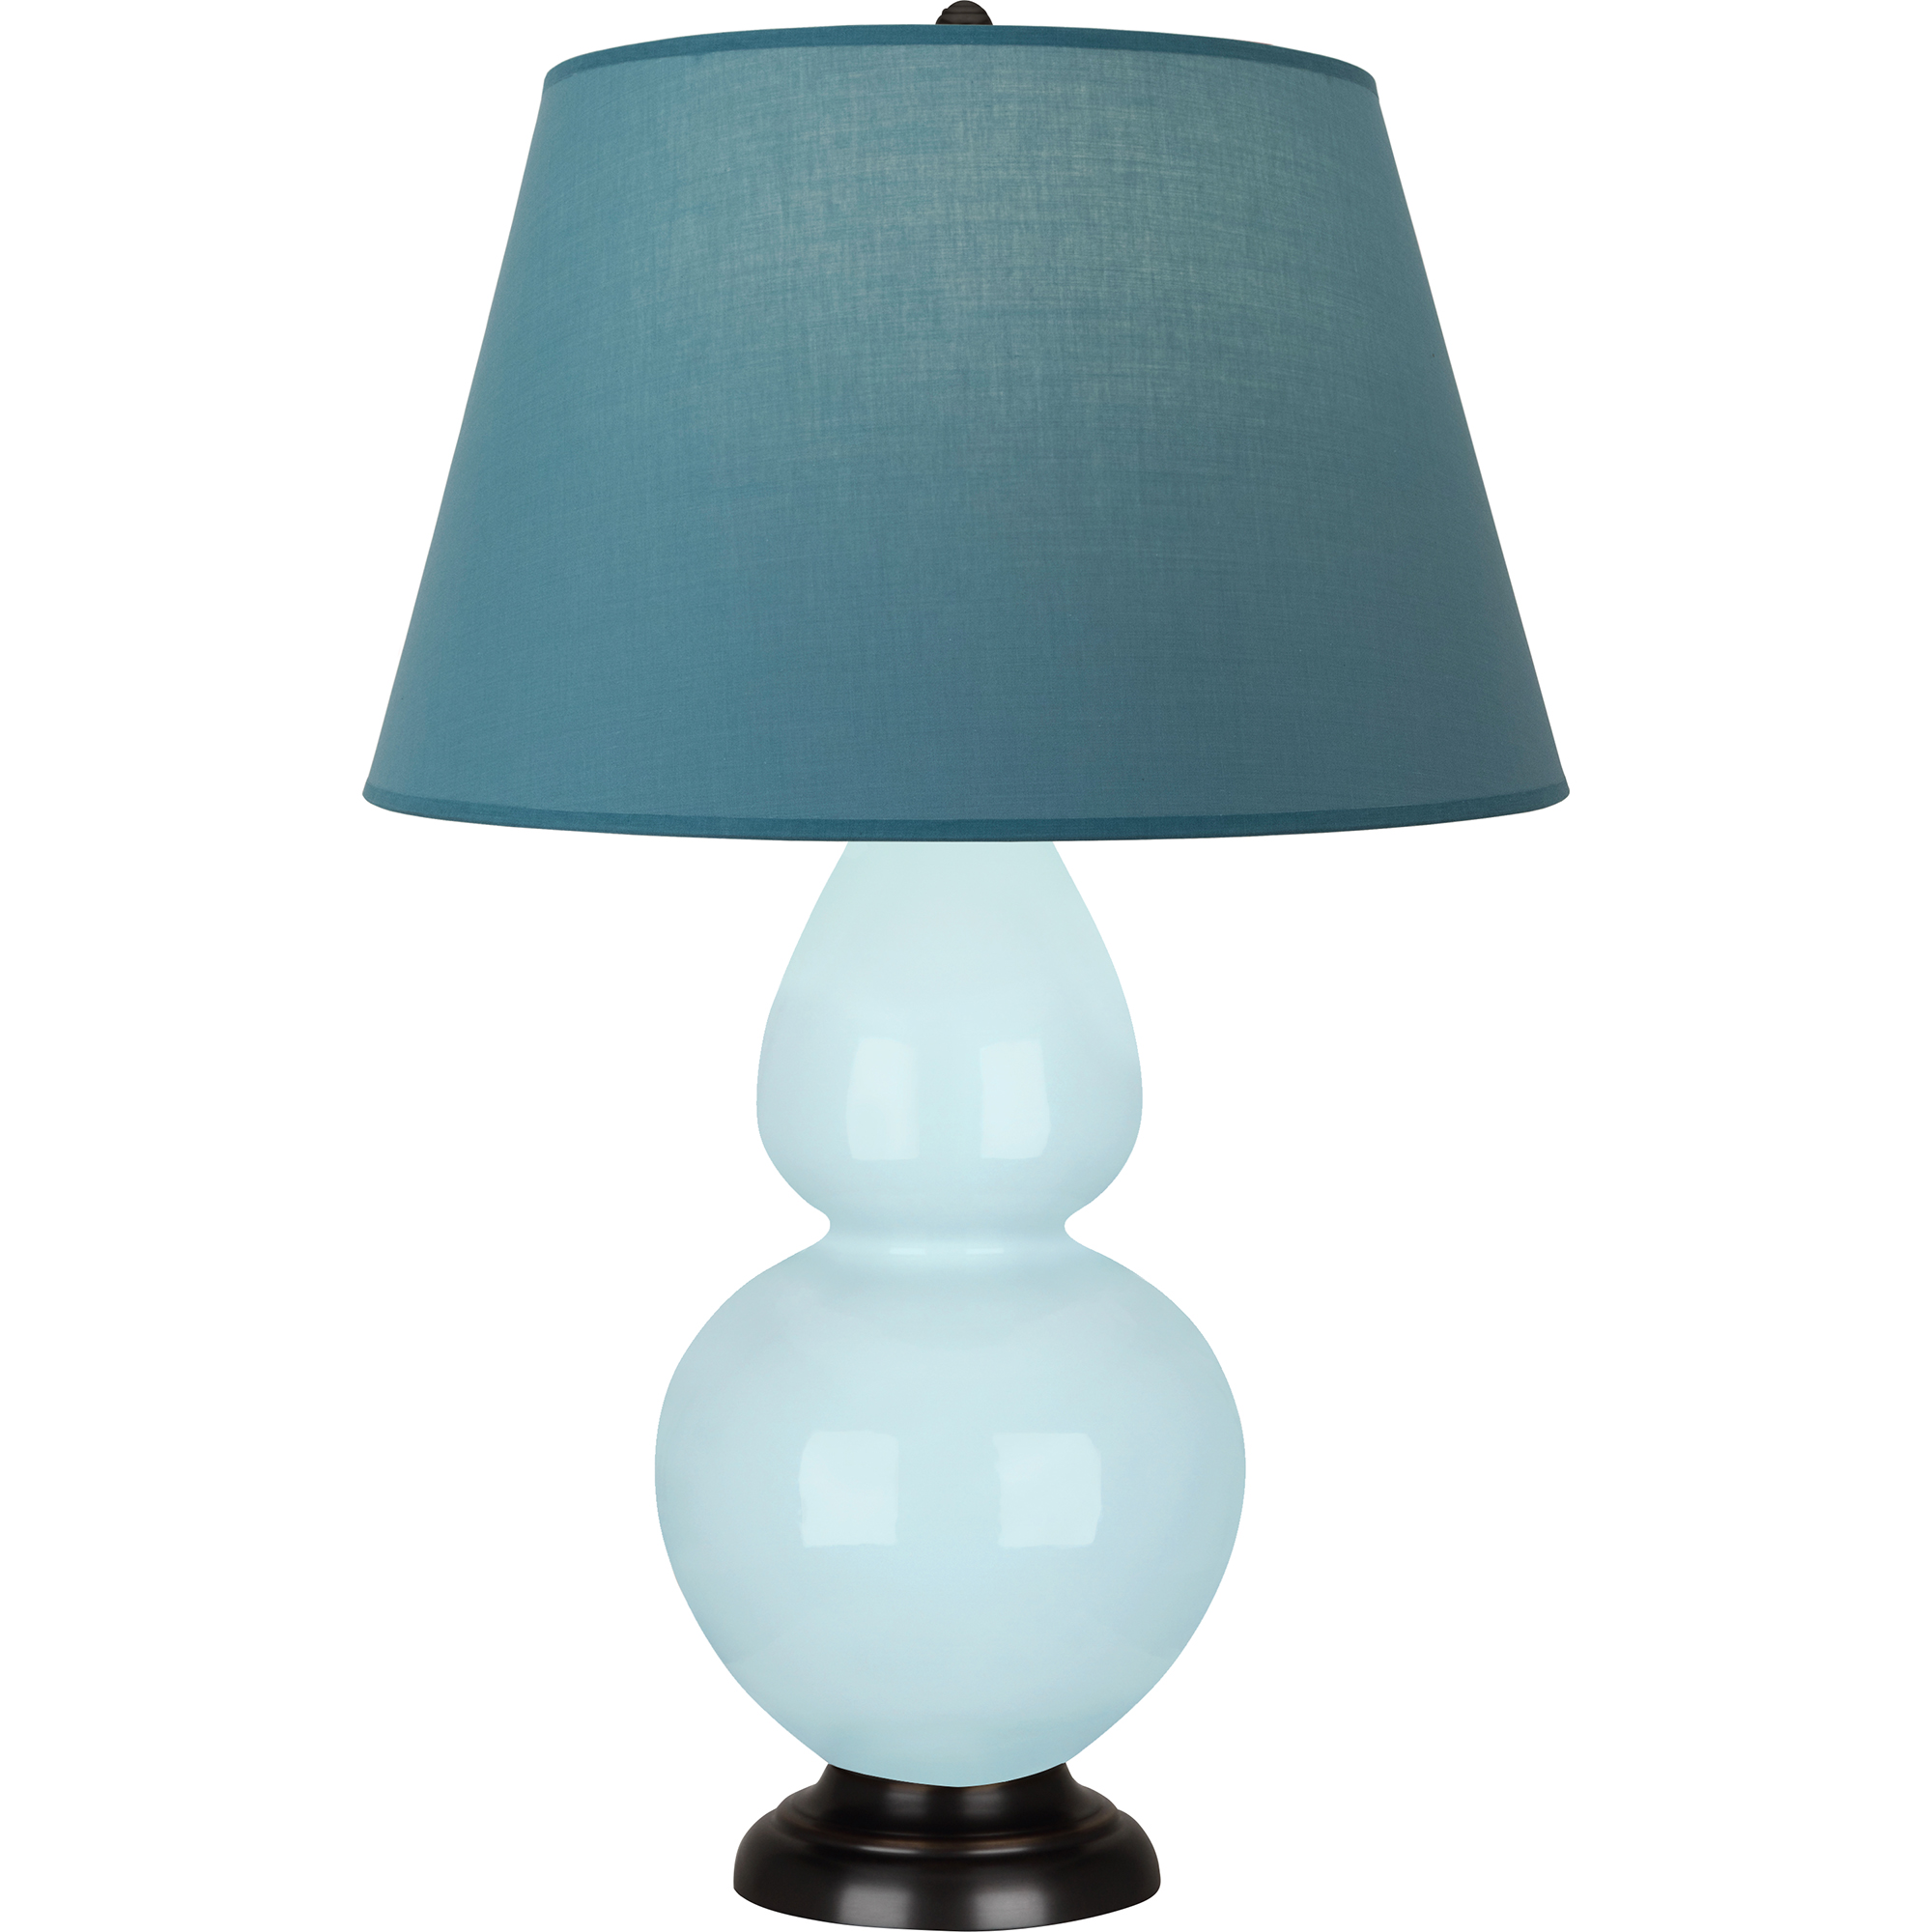 Double Gourd Table Lamp Style #1646B